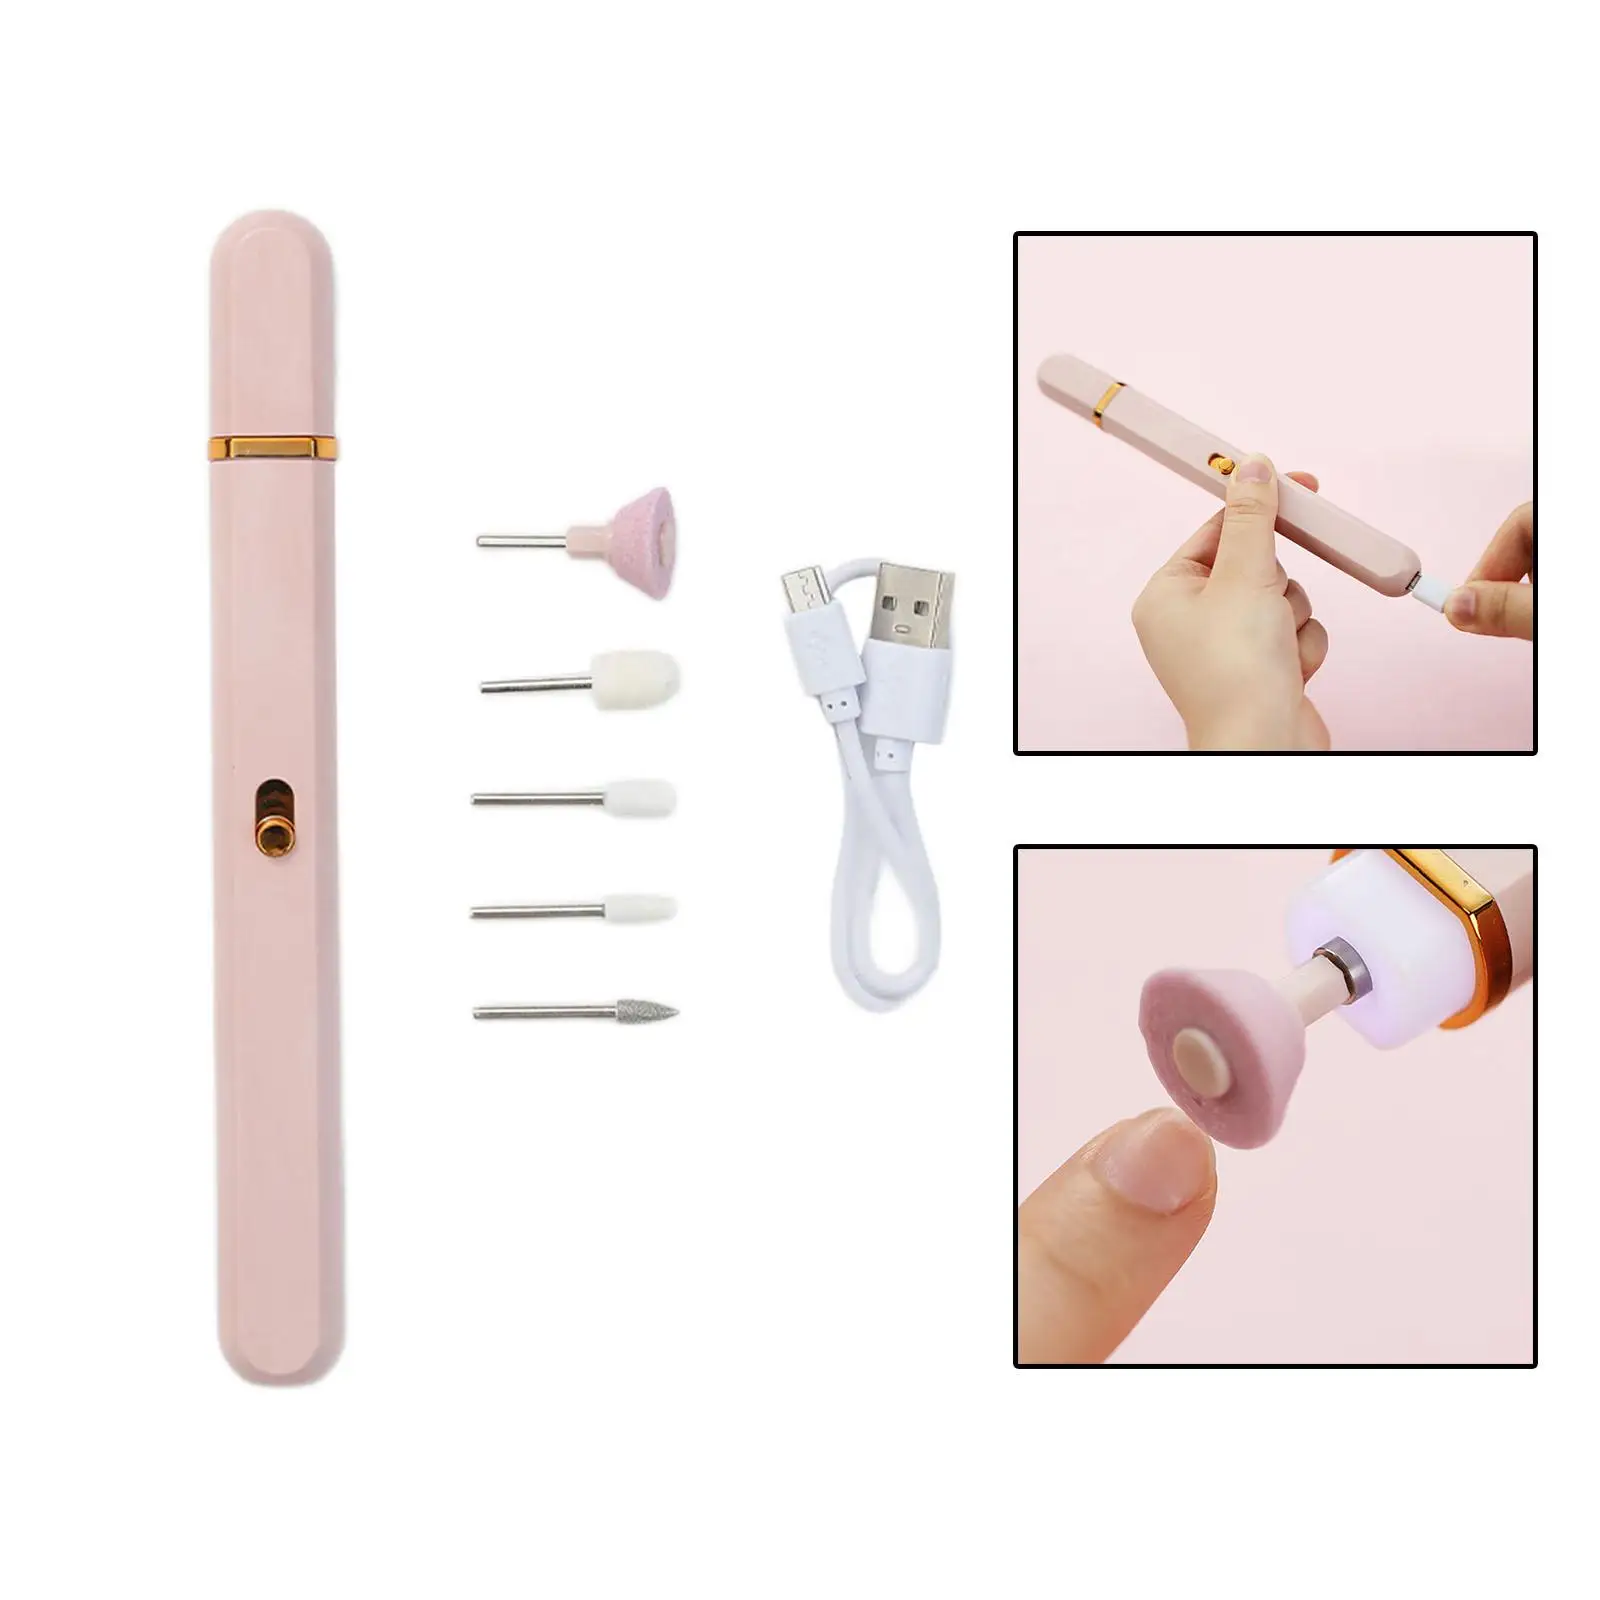 Cordless Nail Drill Set Manicure Pen with Light Nail Polishing Machine for Smooth Cleaning Care Home Salon Personal Home Use